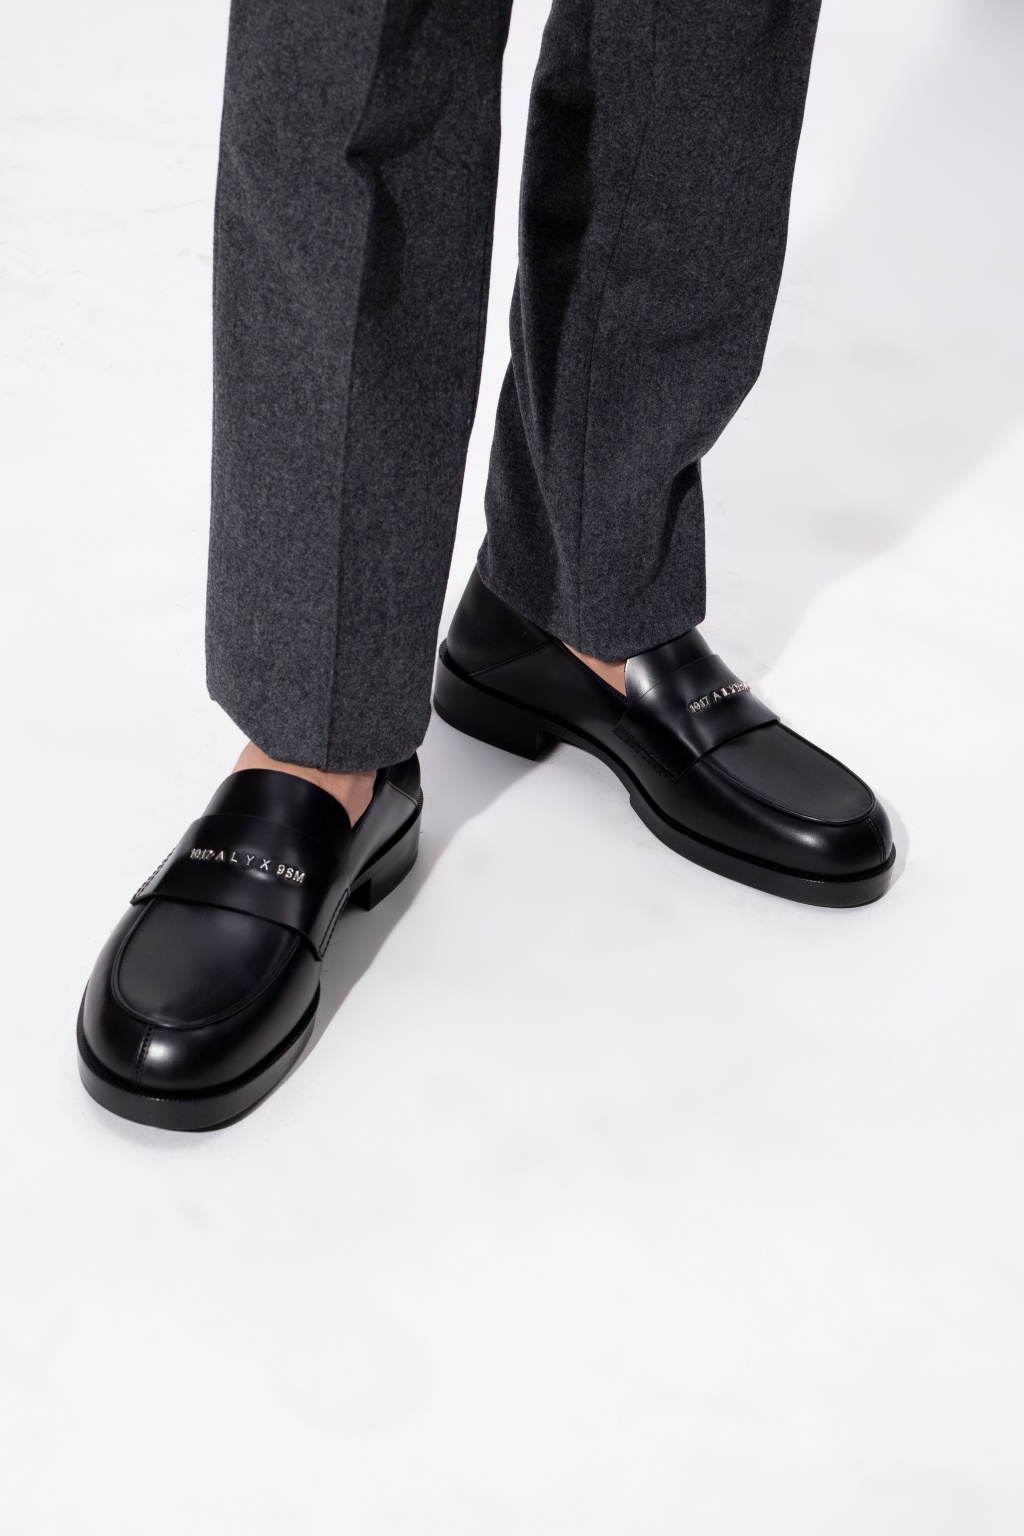 1017 ALYX 9SM 19AW LOAFER SHOESメンズ